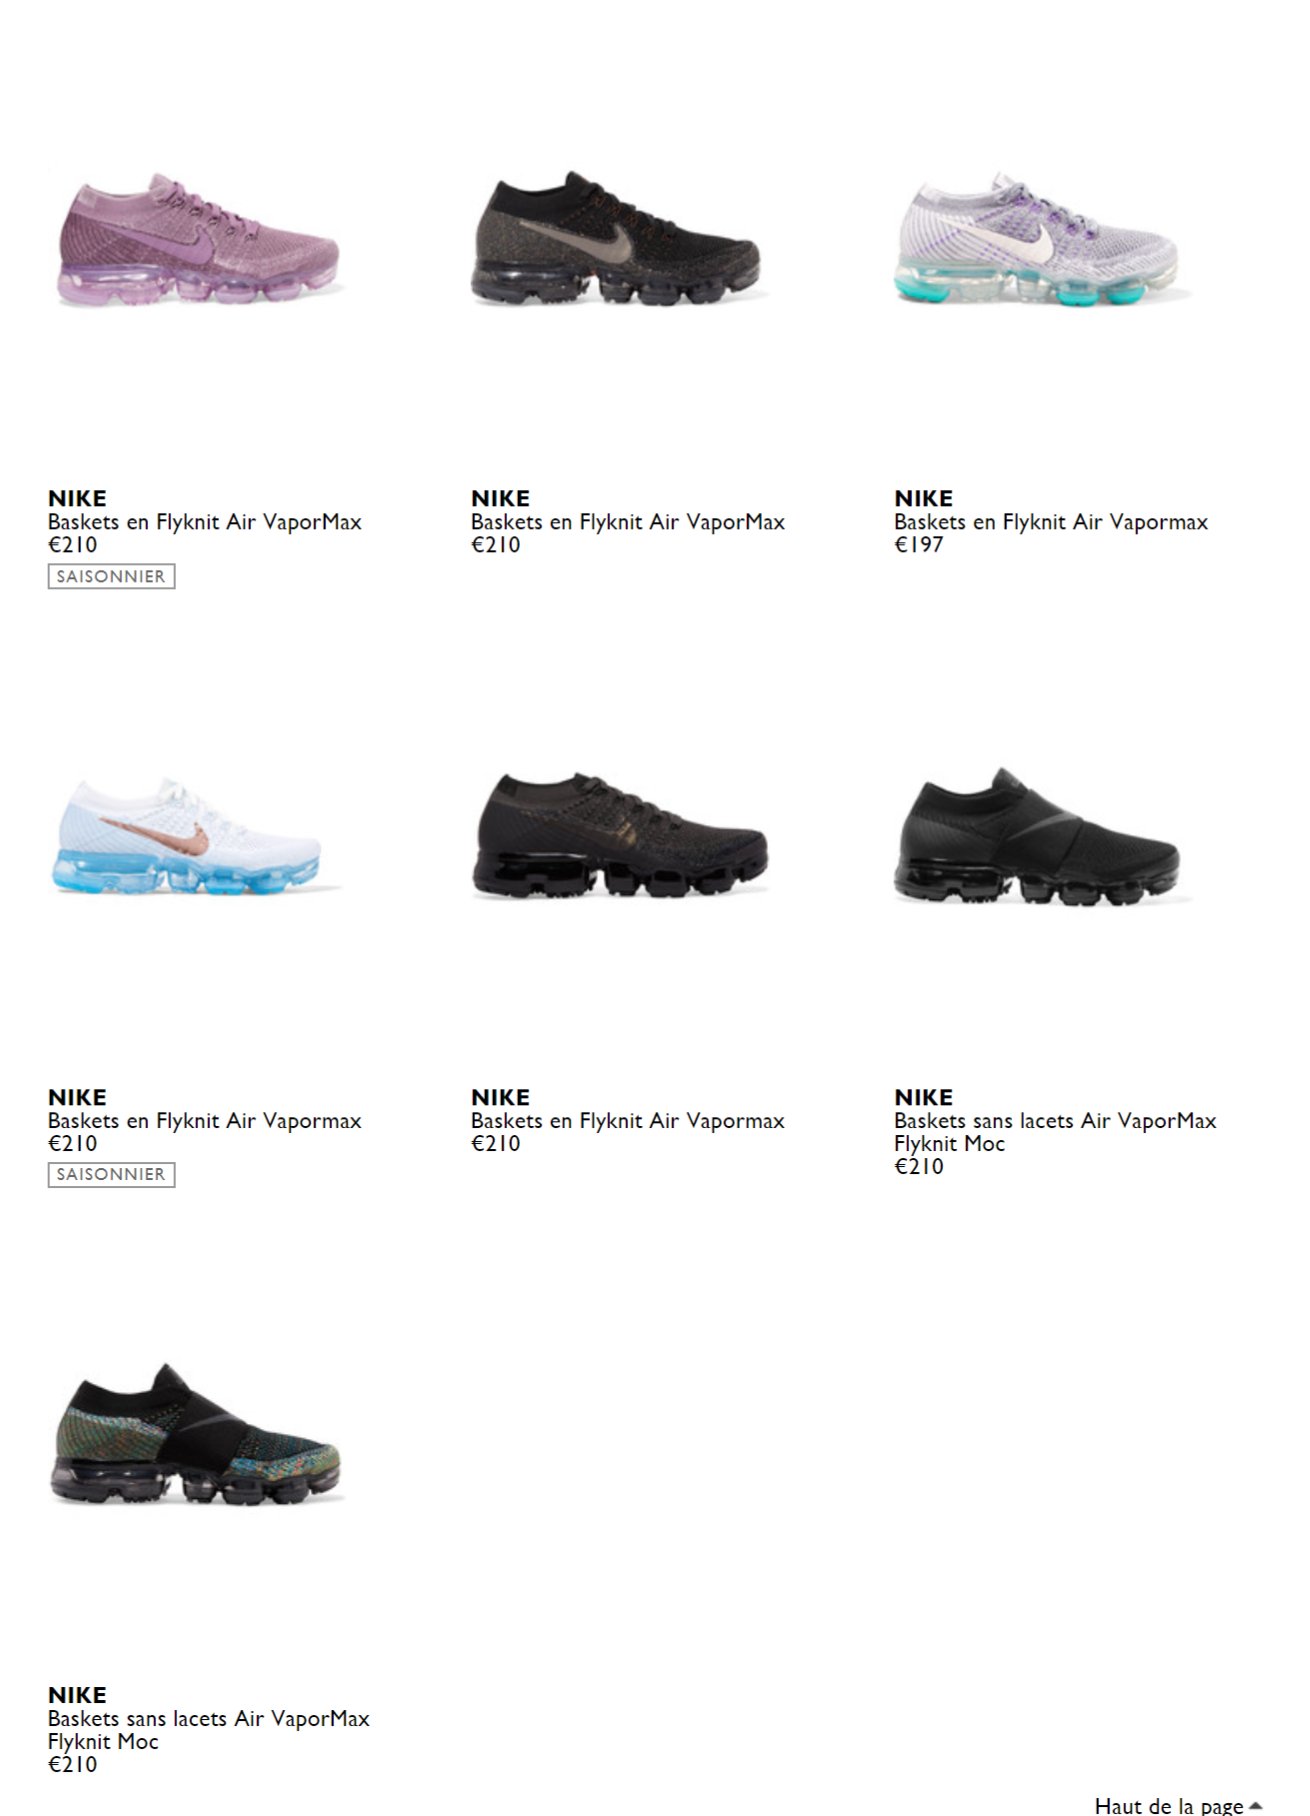 MoreSneakers.com on "Nike Air VaporMax Flyknit on NAP Small sizes/Wmns sizes UK:https://t.co/zasAt47qPd US:https://t.co/vK5lDmj0Mv https://t.co/7gZr5tWSw6" Twitter